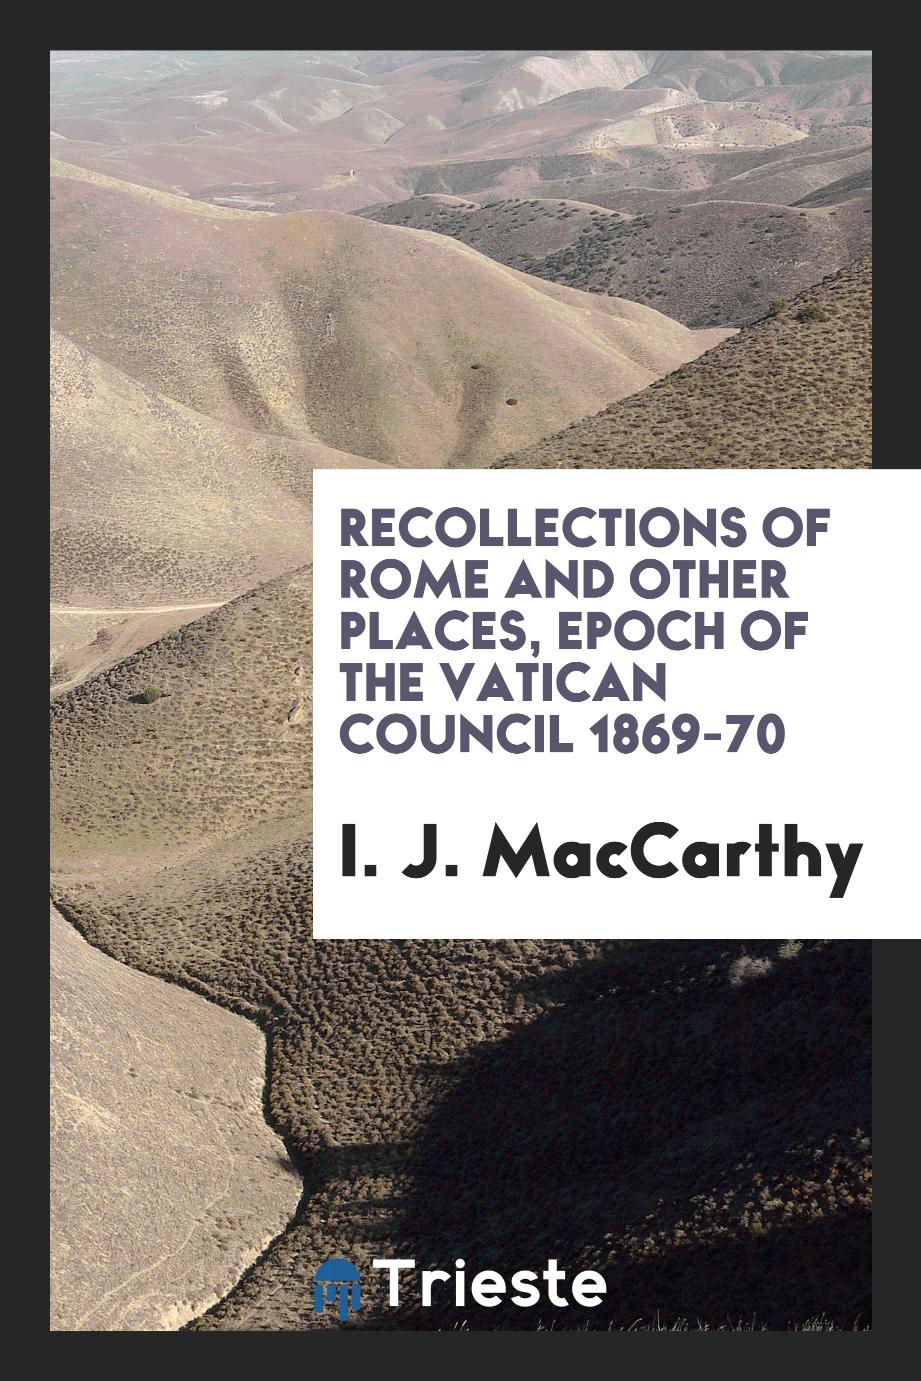 Recollections of Rome and other places, epoch of the Vatican Council 1869-70